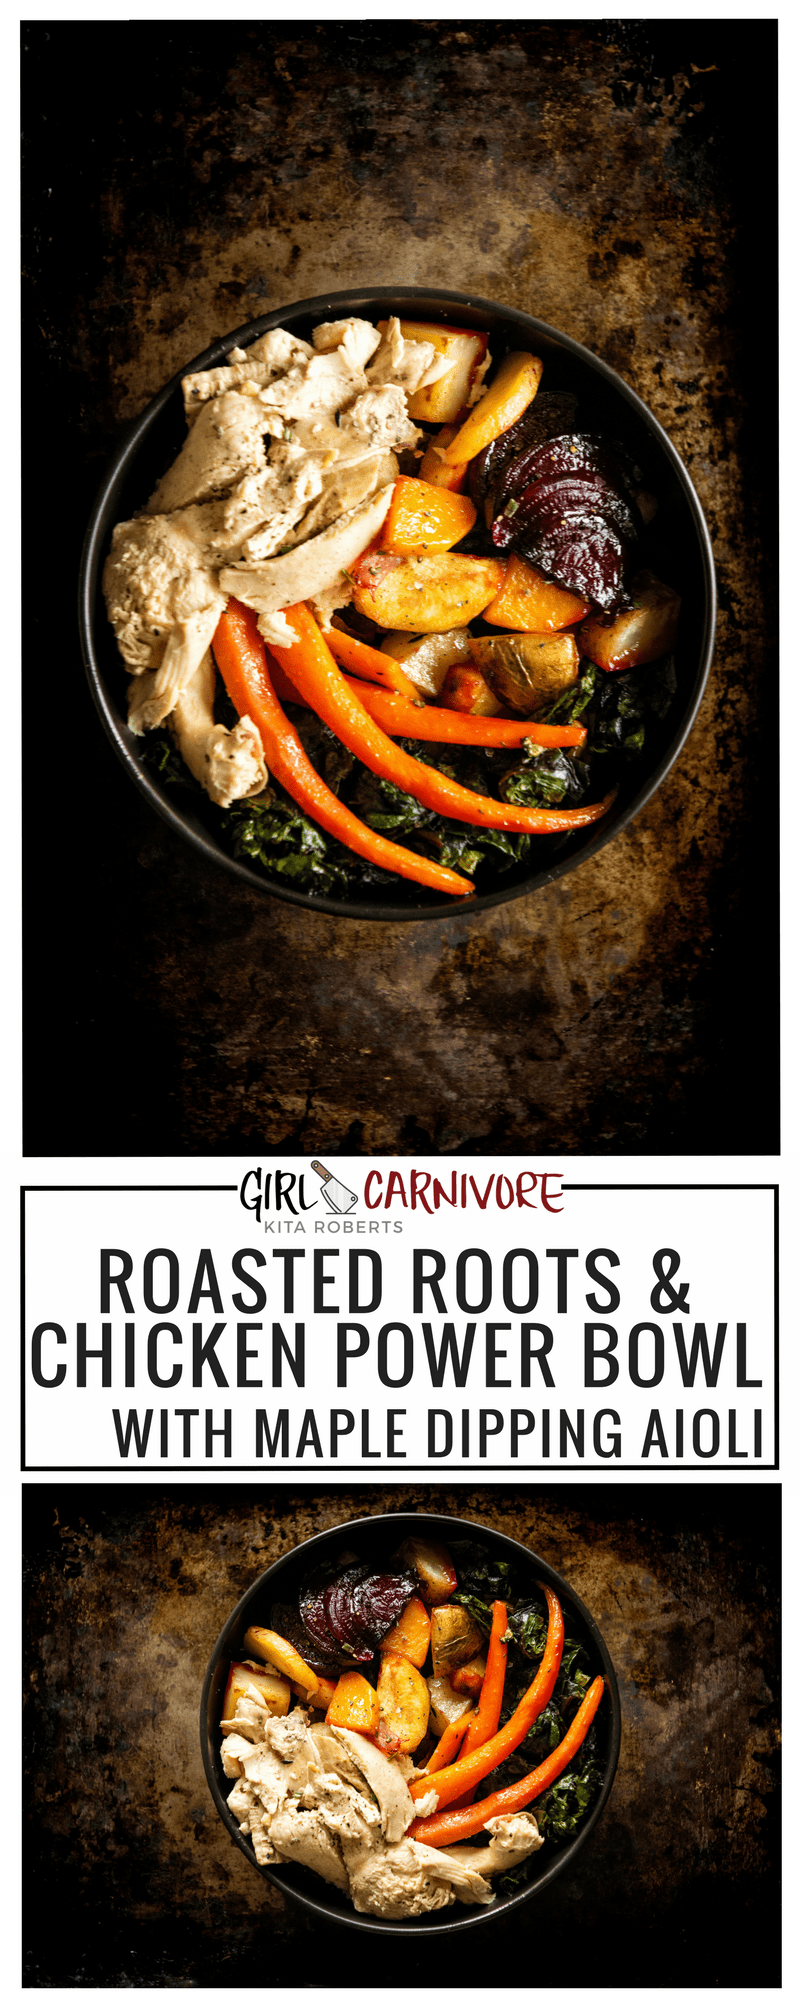 Roasted Roots and Roasted Chicken Power Bowl with Maple Dipping Aioli